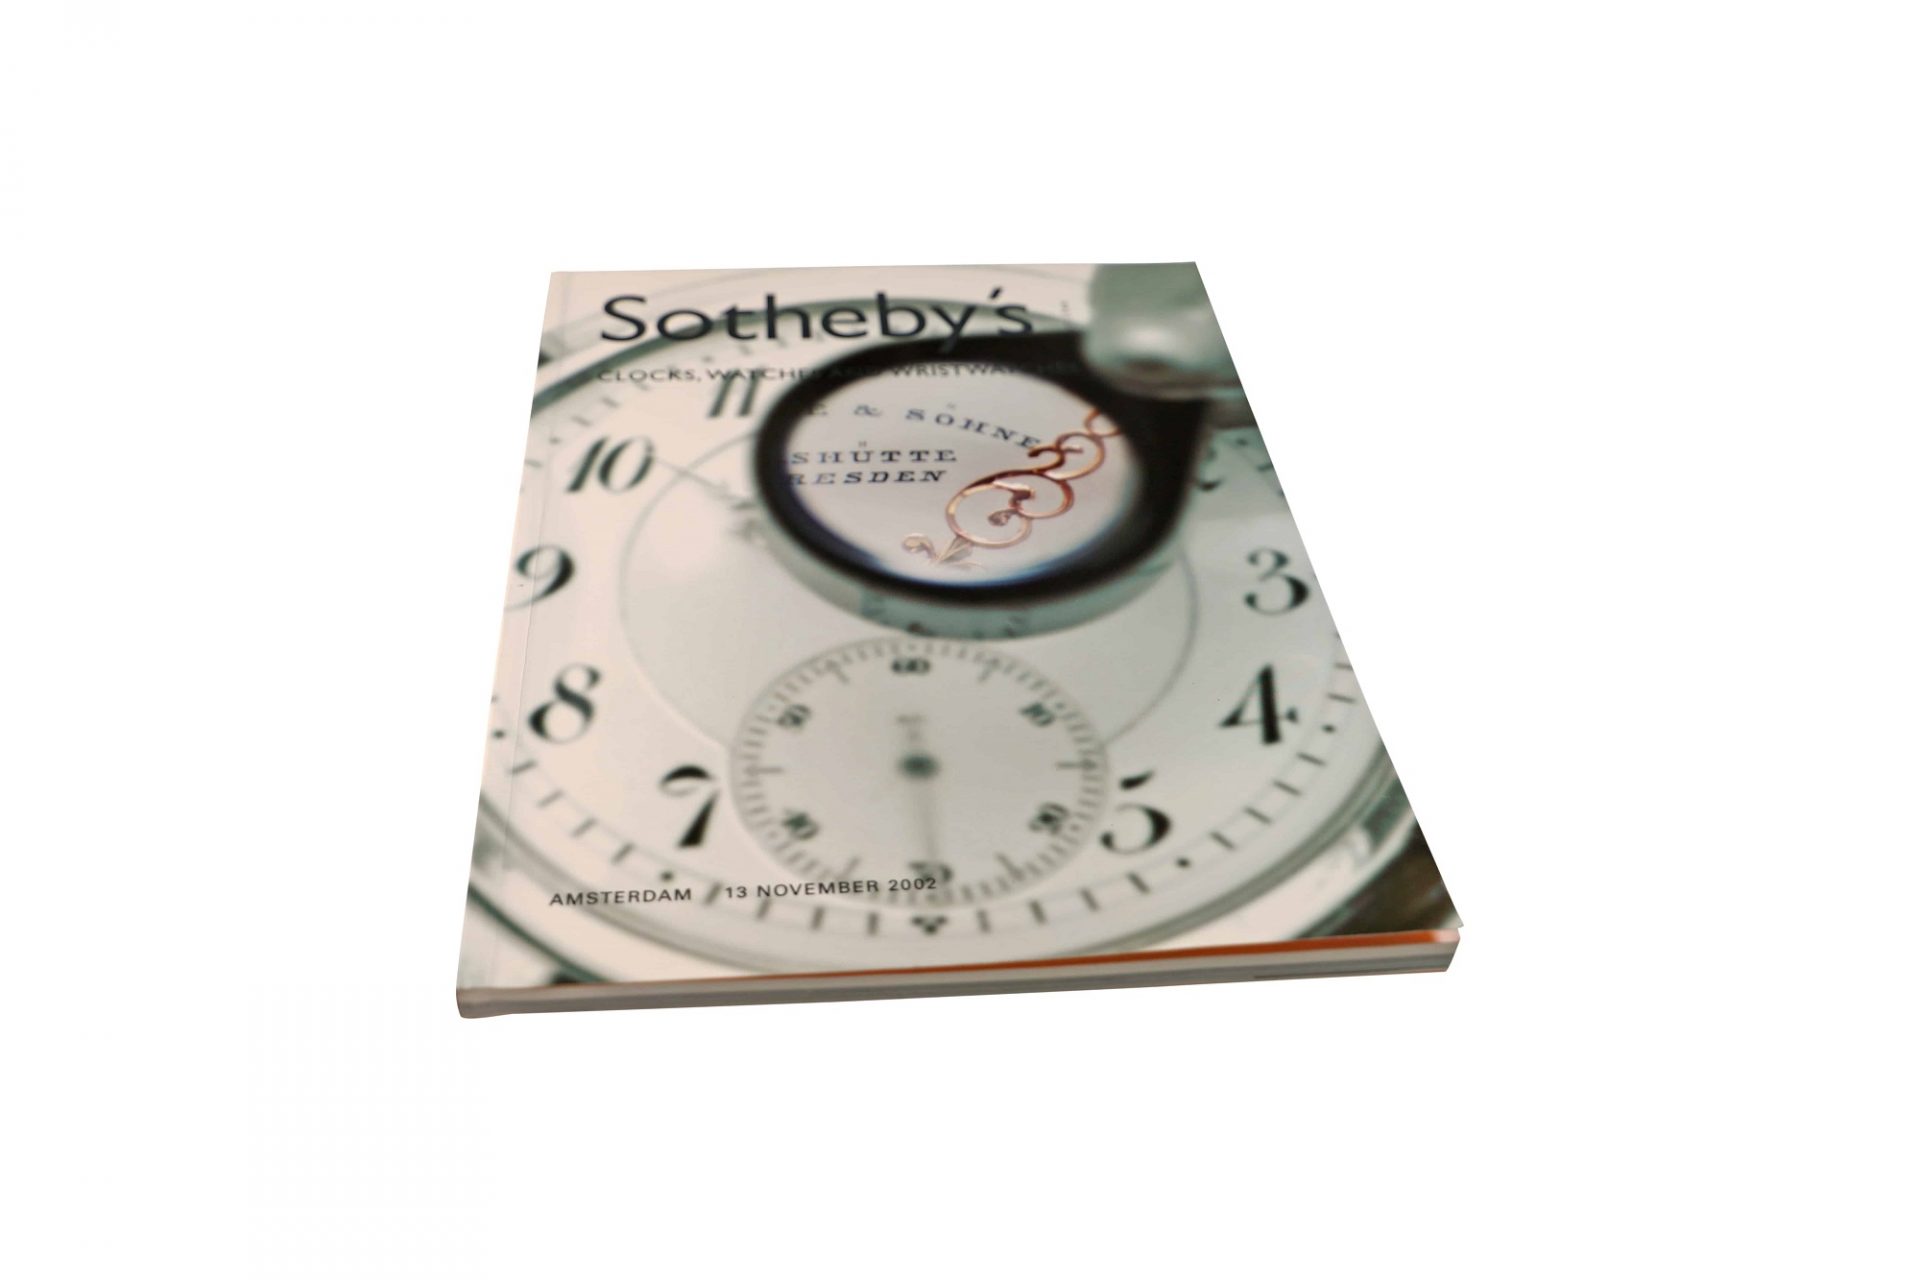 Sotheby's Clock, Watches And Wristwatches Amsterdam November 13, 2002 Auction Catalog - Rare Watch Parts